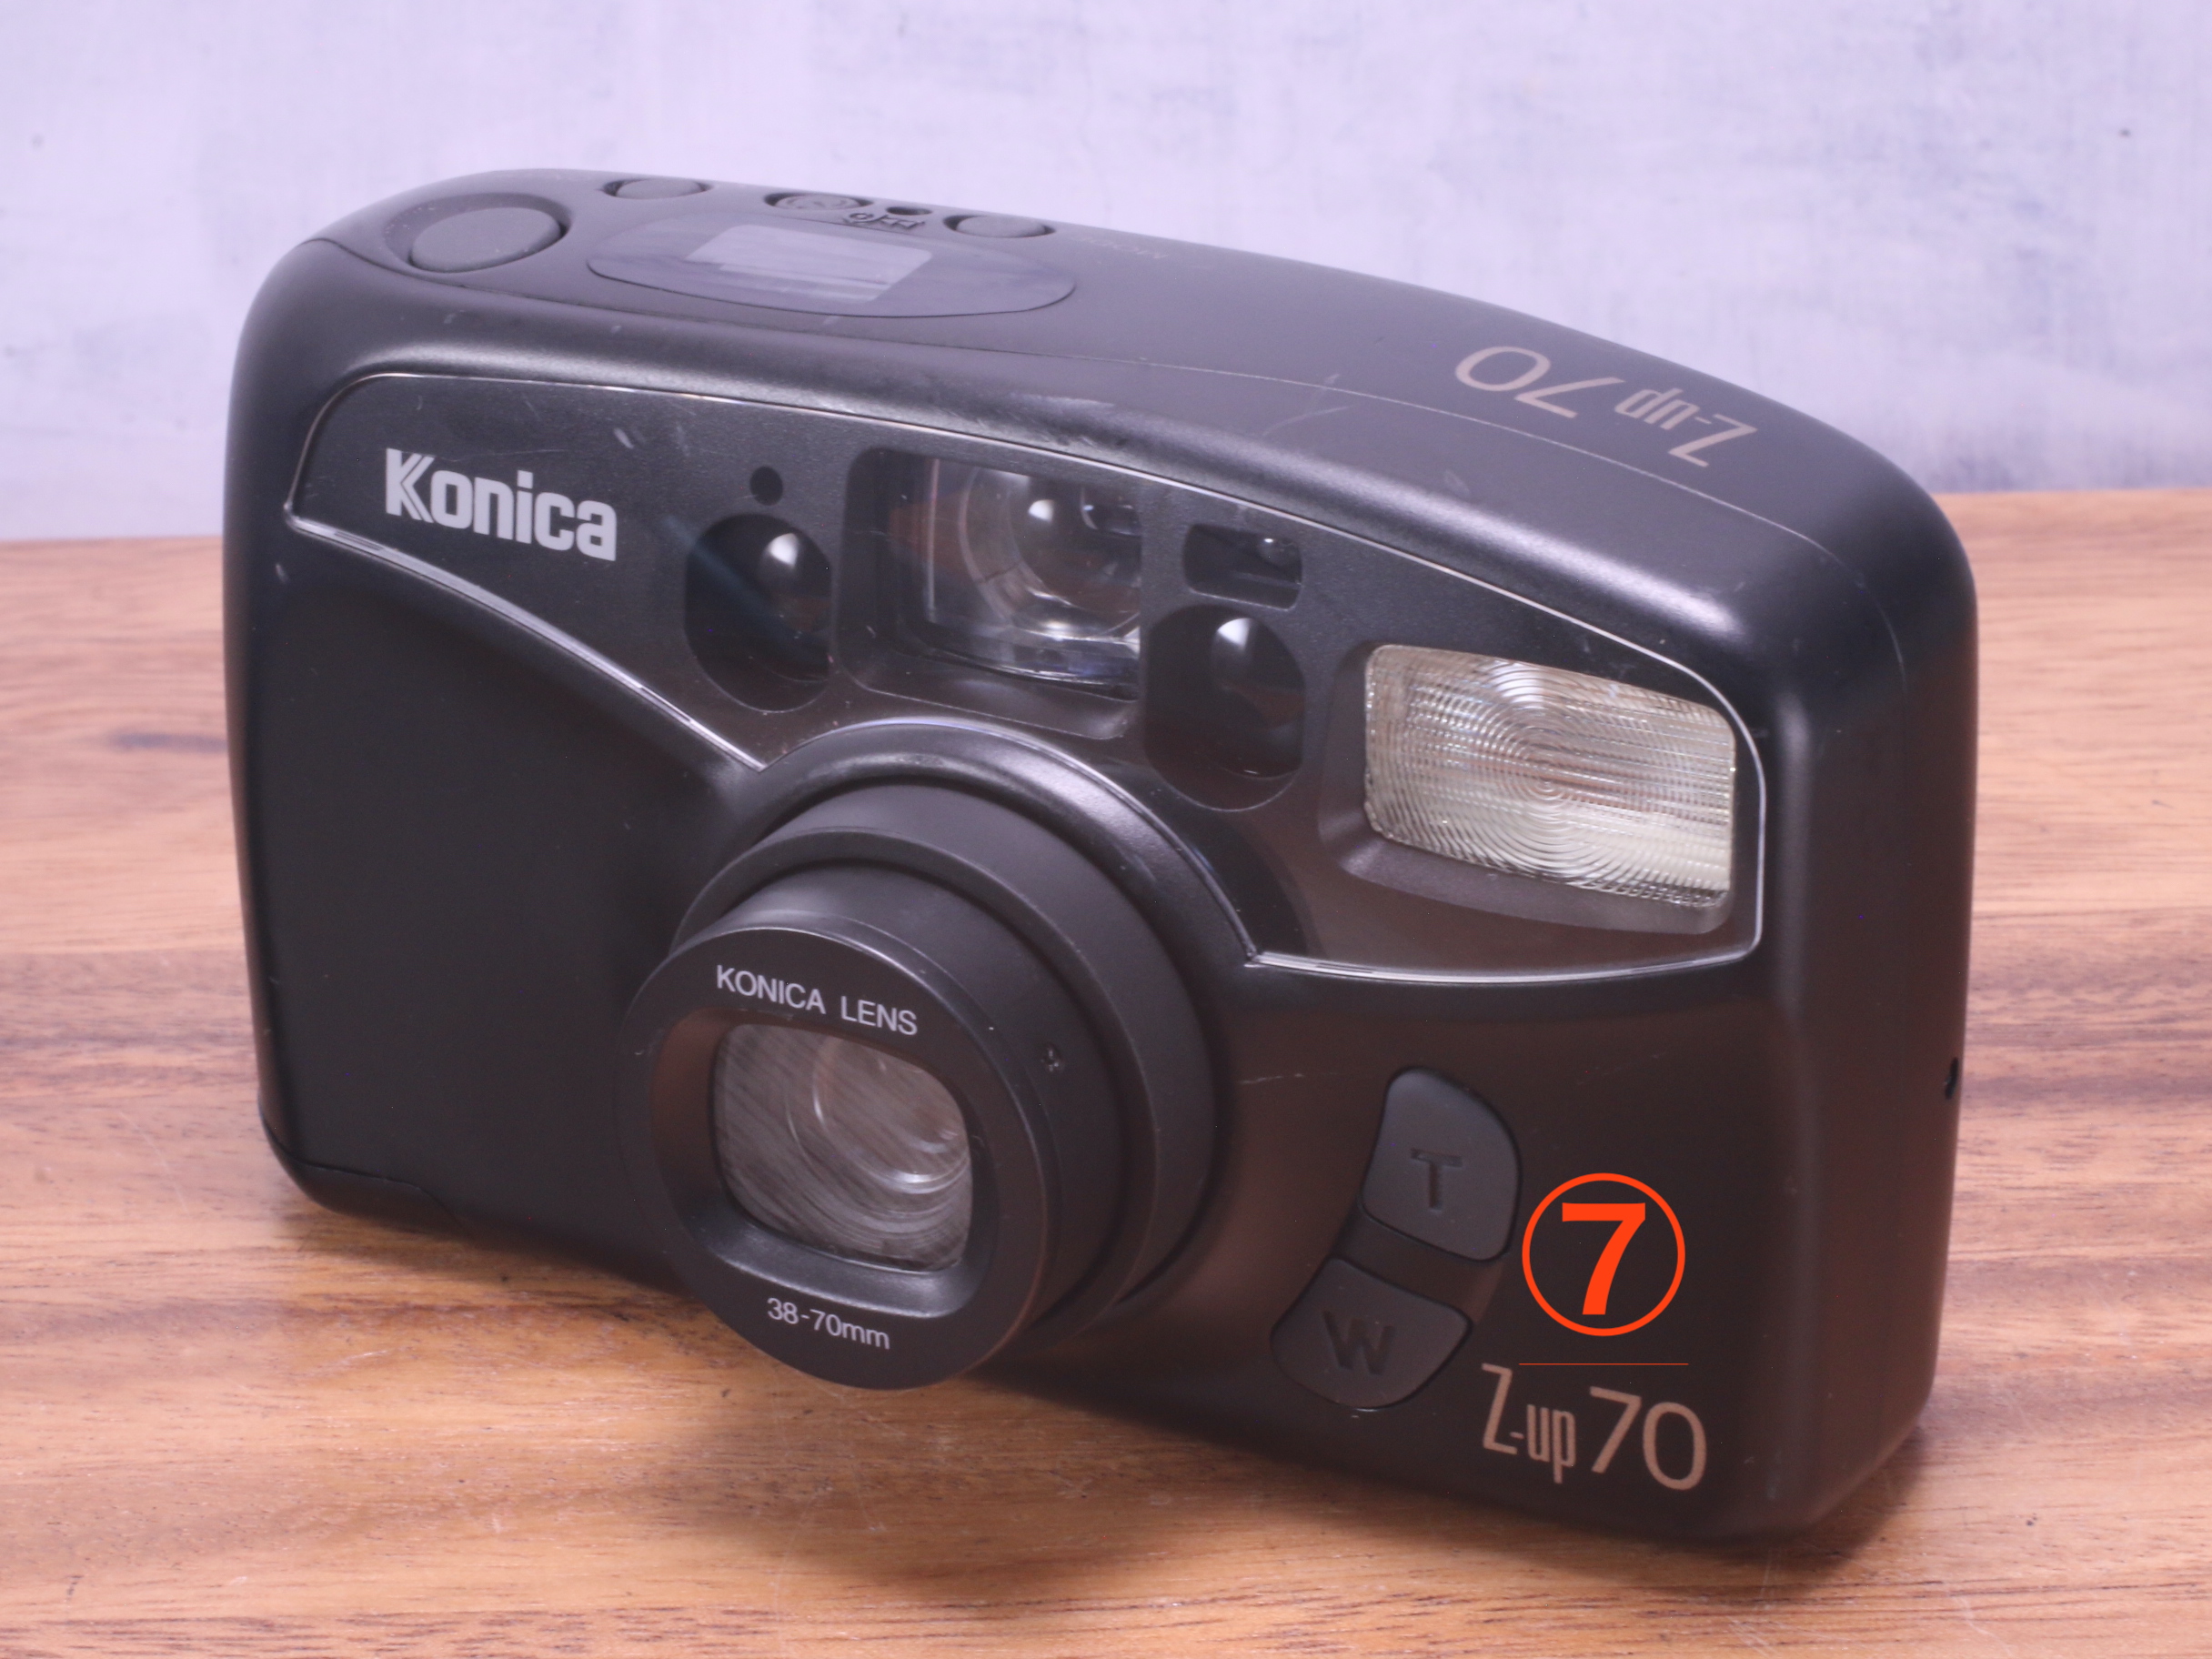 Konica Z-up 70 の使い方 | Totte Me Camera